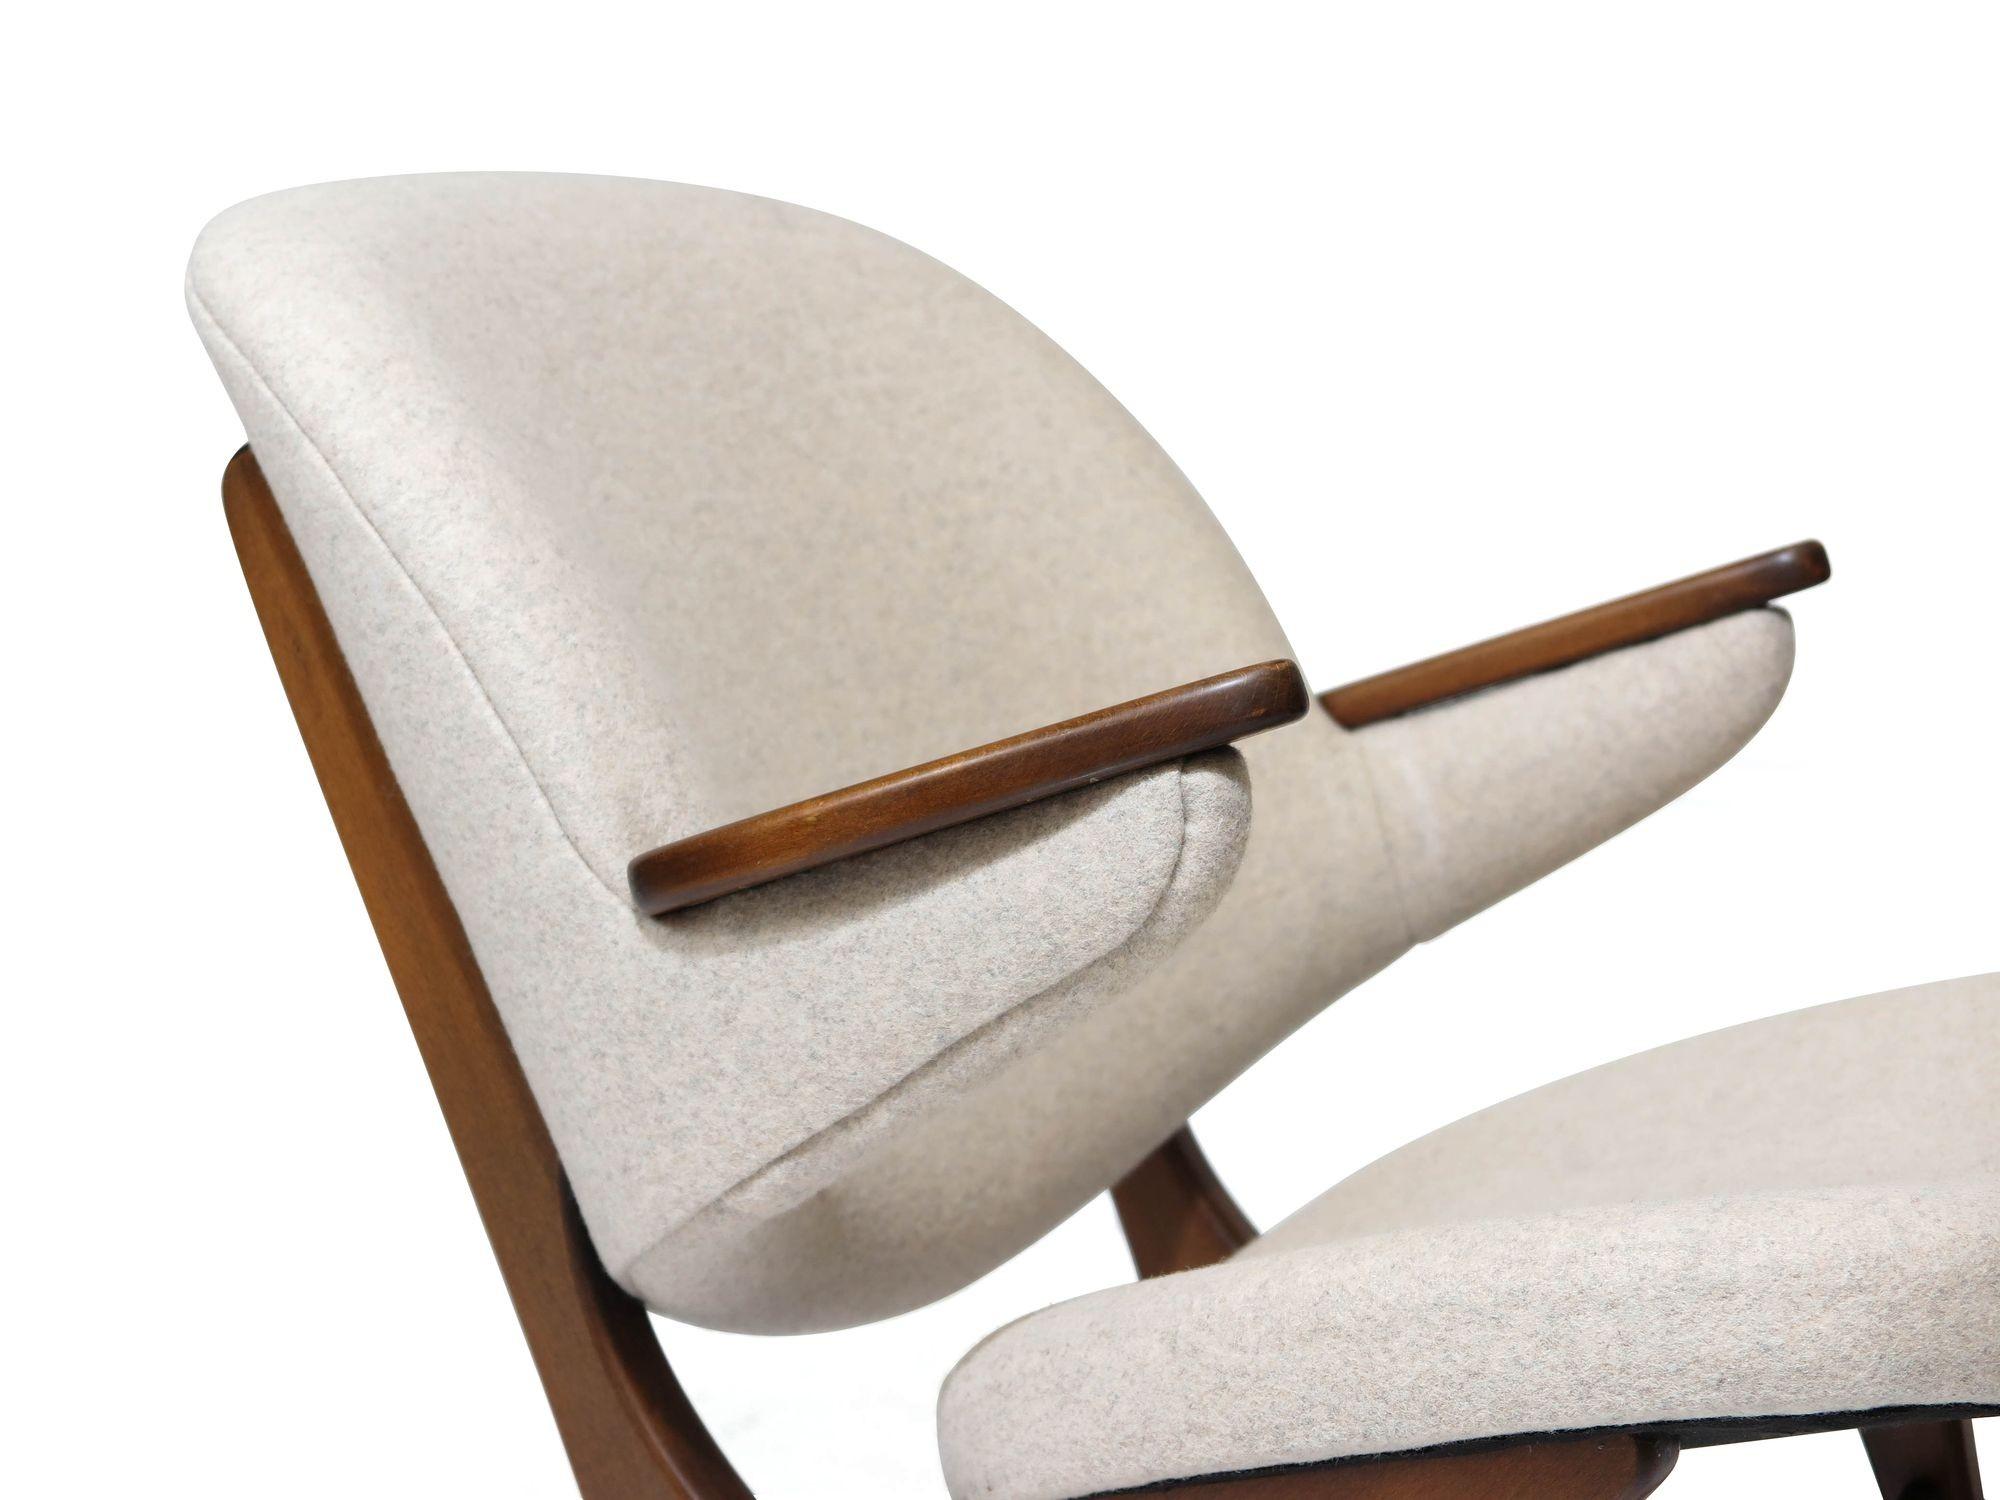 Carl Edward Matthes for C.E. Matthes lounge chair. Sculpted wood frame with comfortable curved back rest, newly reupholstered in an off-white wool textile. The wood frame is a walnut stain on beech wood, original finish, which has been cleaned and